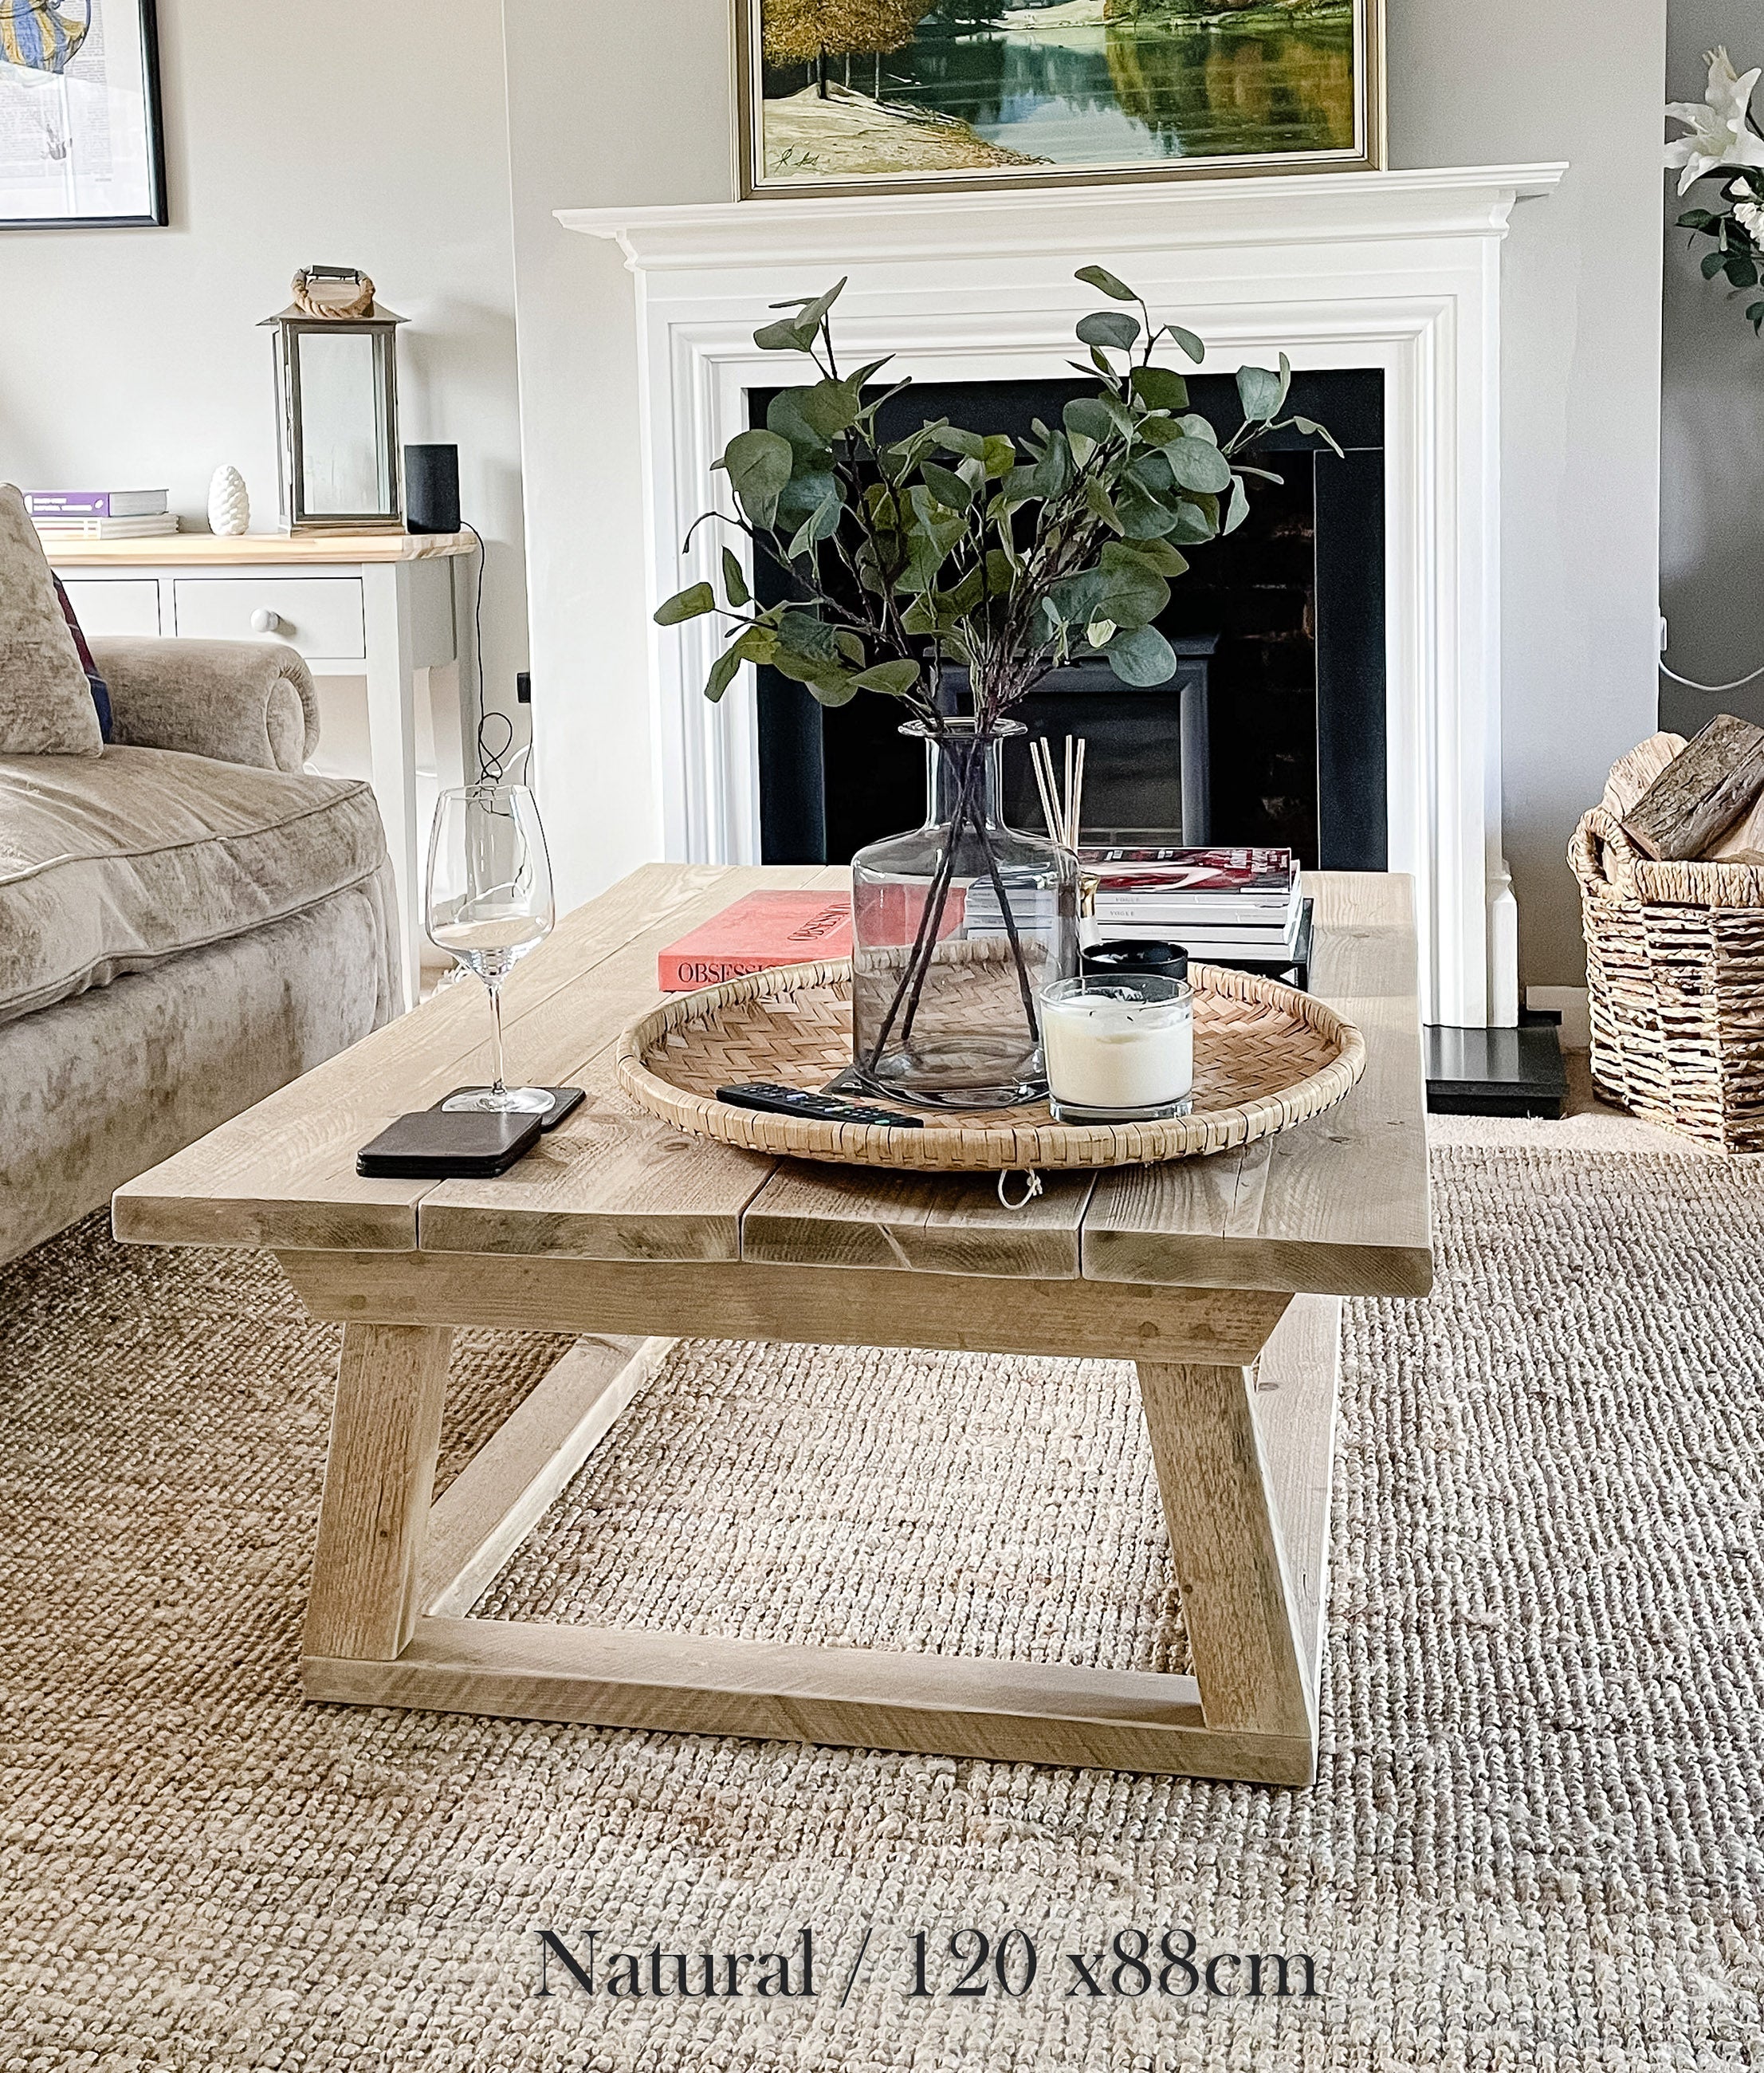 The Hoxton reclaimed wood coffee table, handmade by Still and Bloom